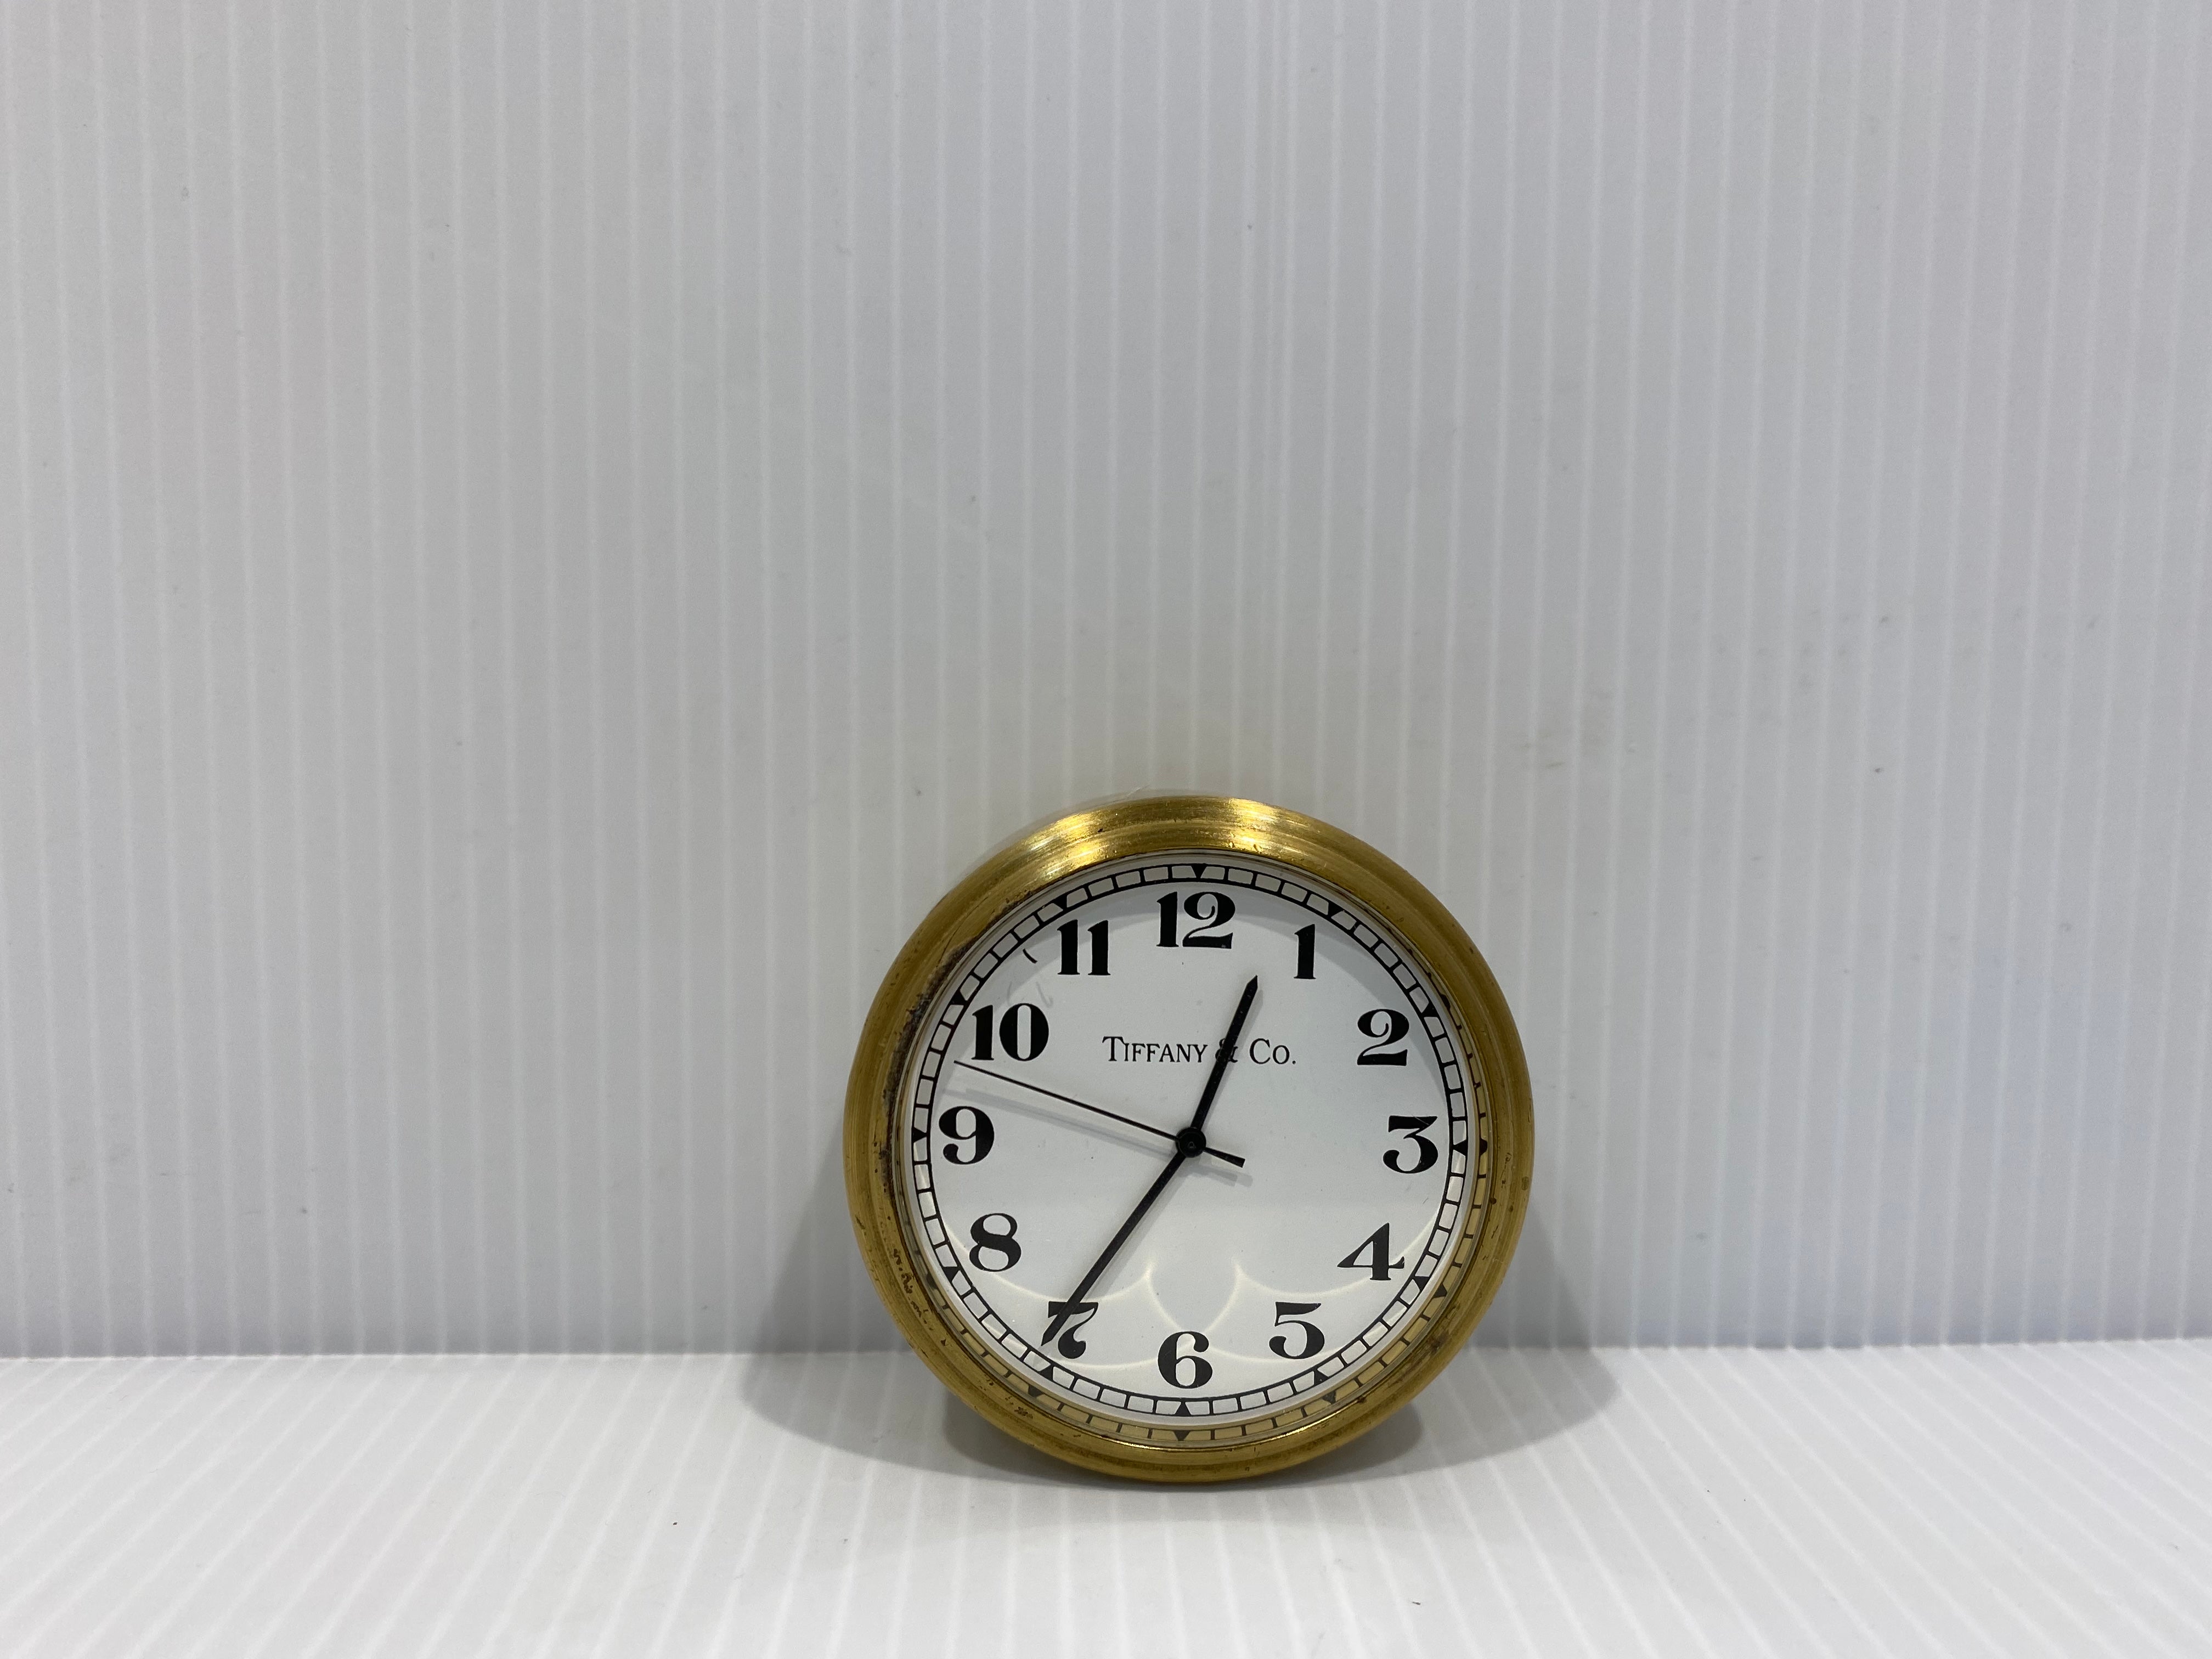 Tiffany & Co. Completely Round Small Brass Guartz Desk Clock With Alarm.